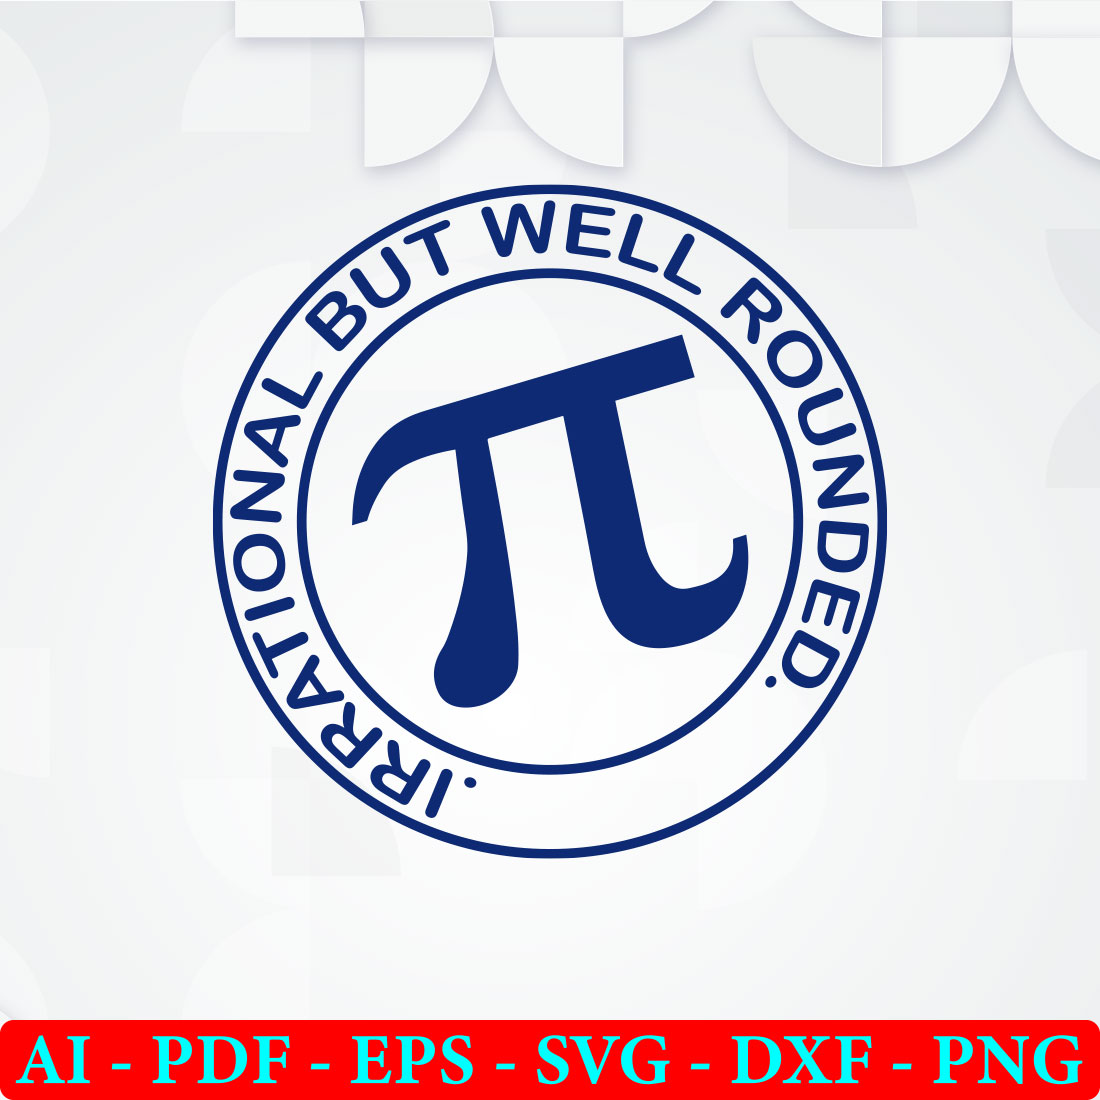 Blue and white pi symbol on a white background.